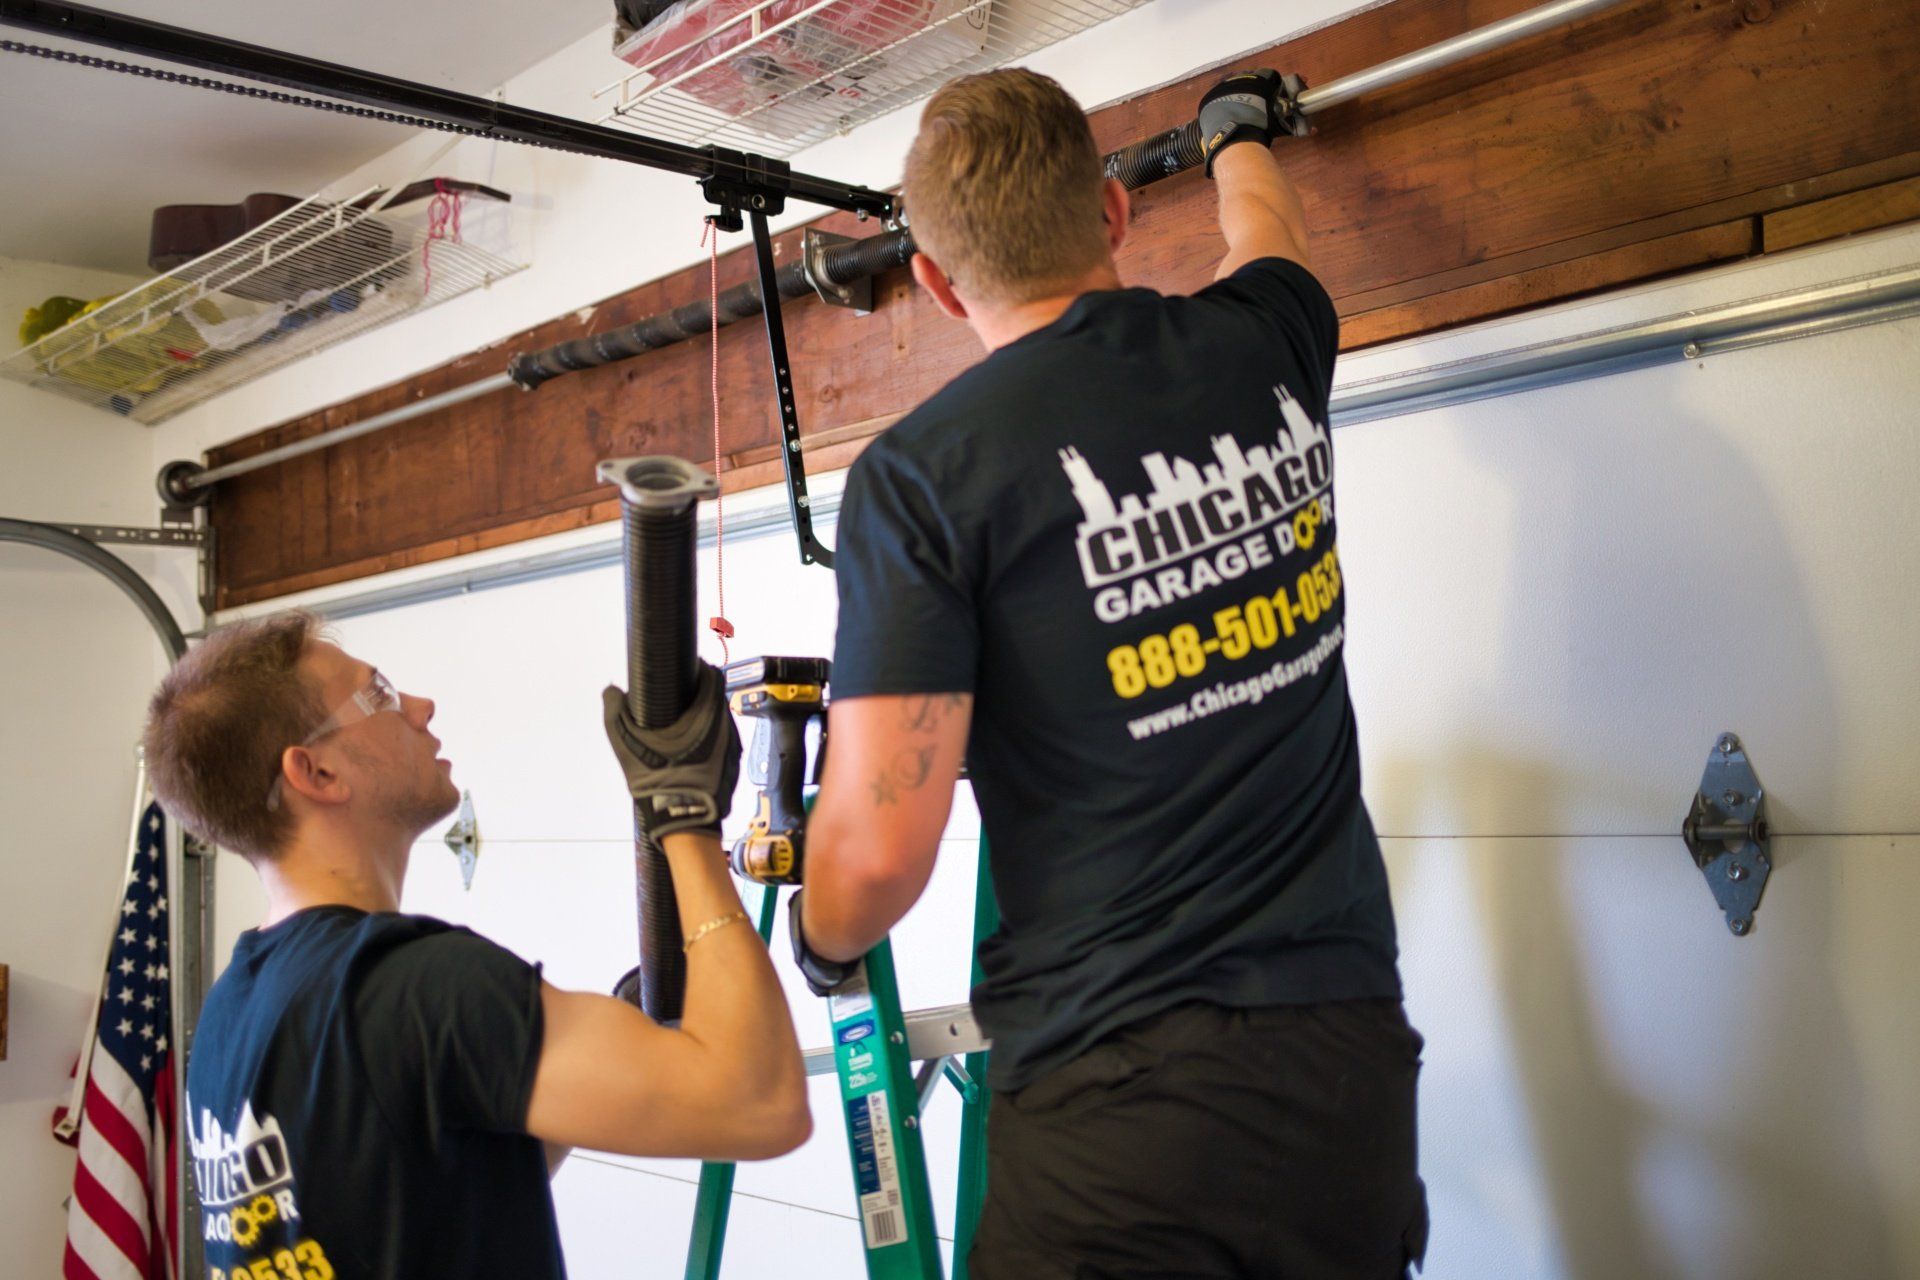 Excellent garage door repair service in Island Lake, IL and all the surrounding areas